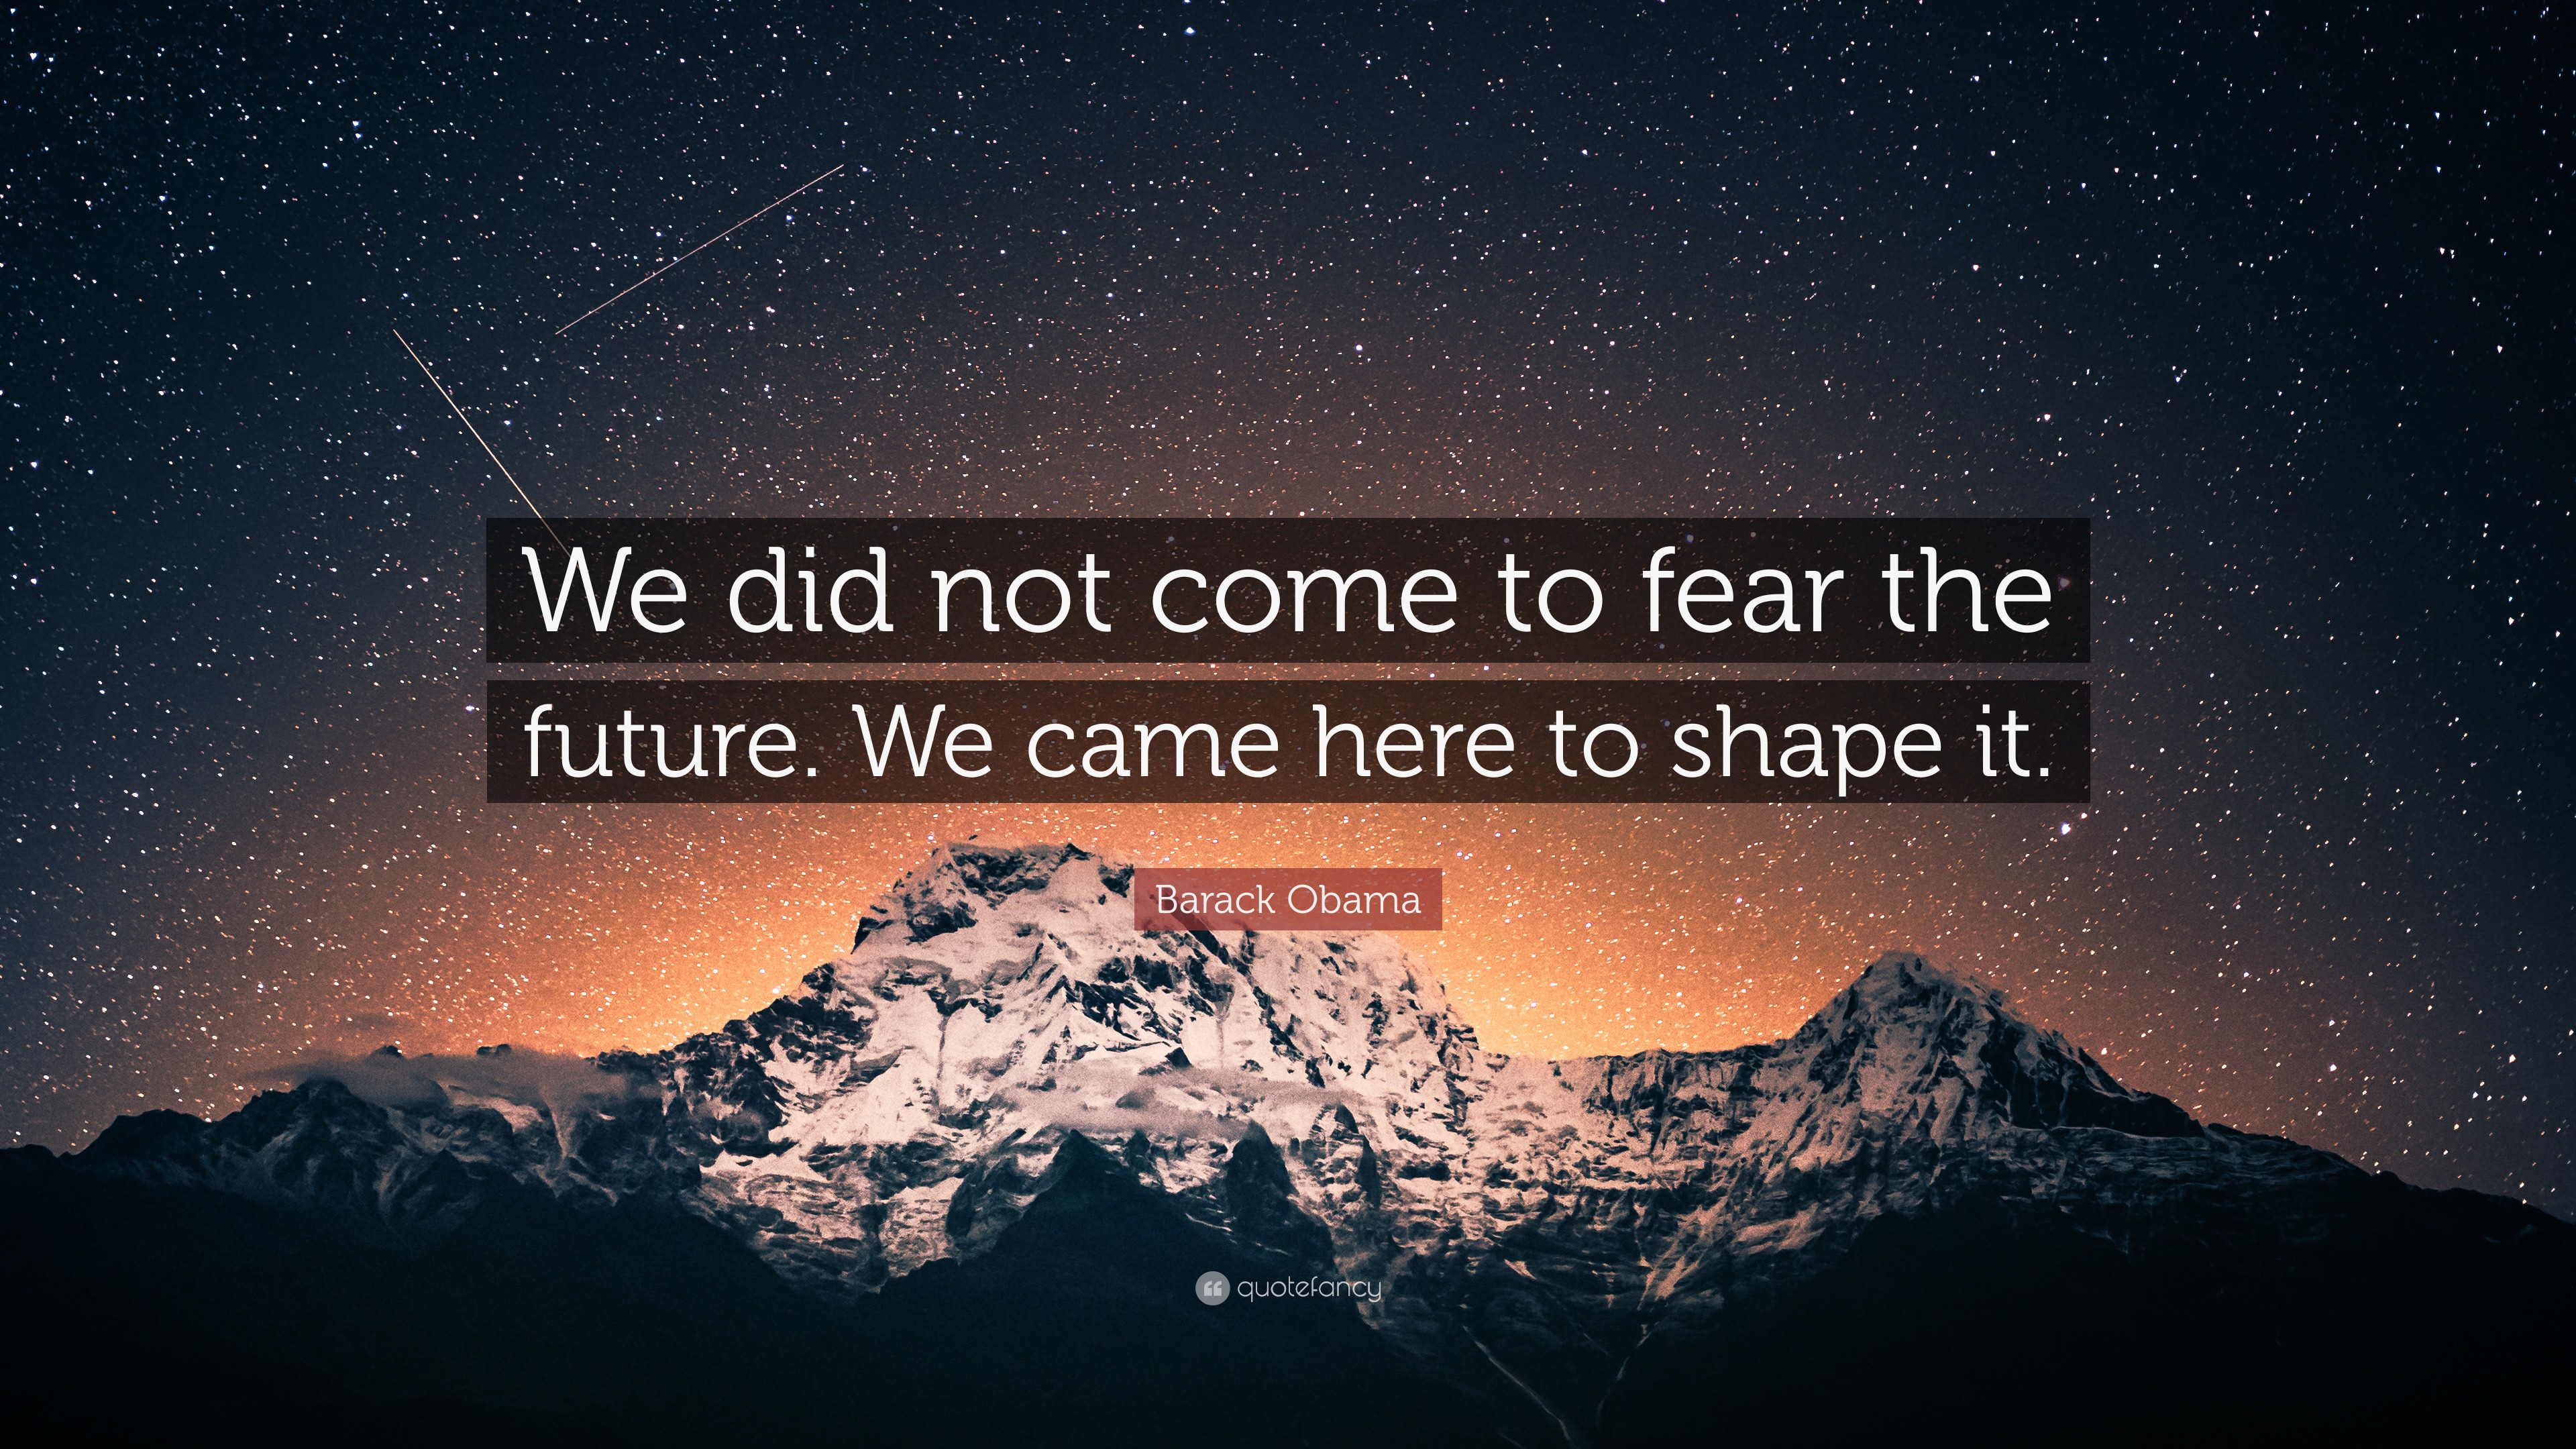 Barack Obama Quote: “We did not come to fear the future. We came here